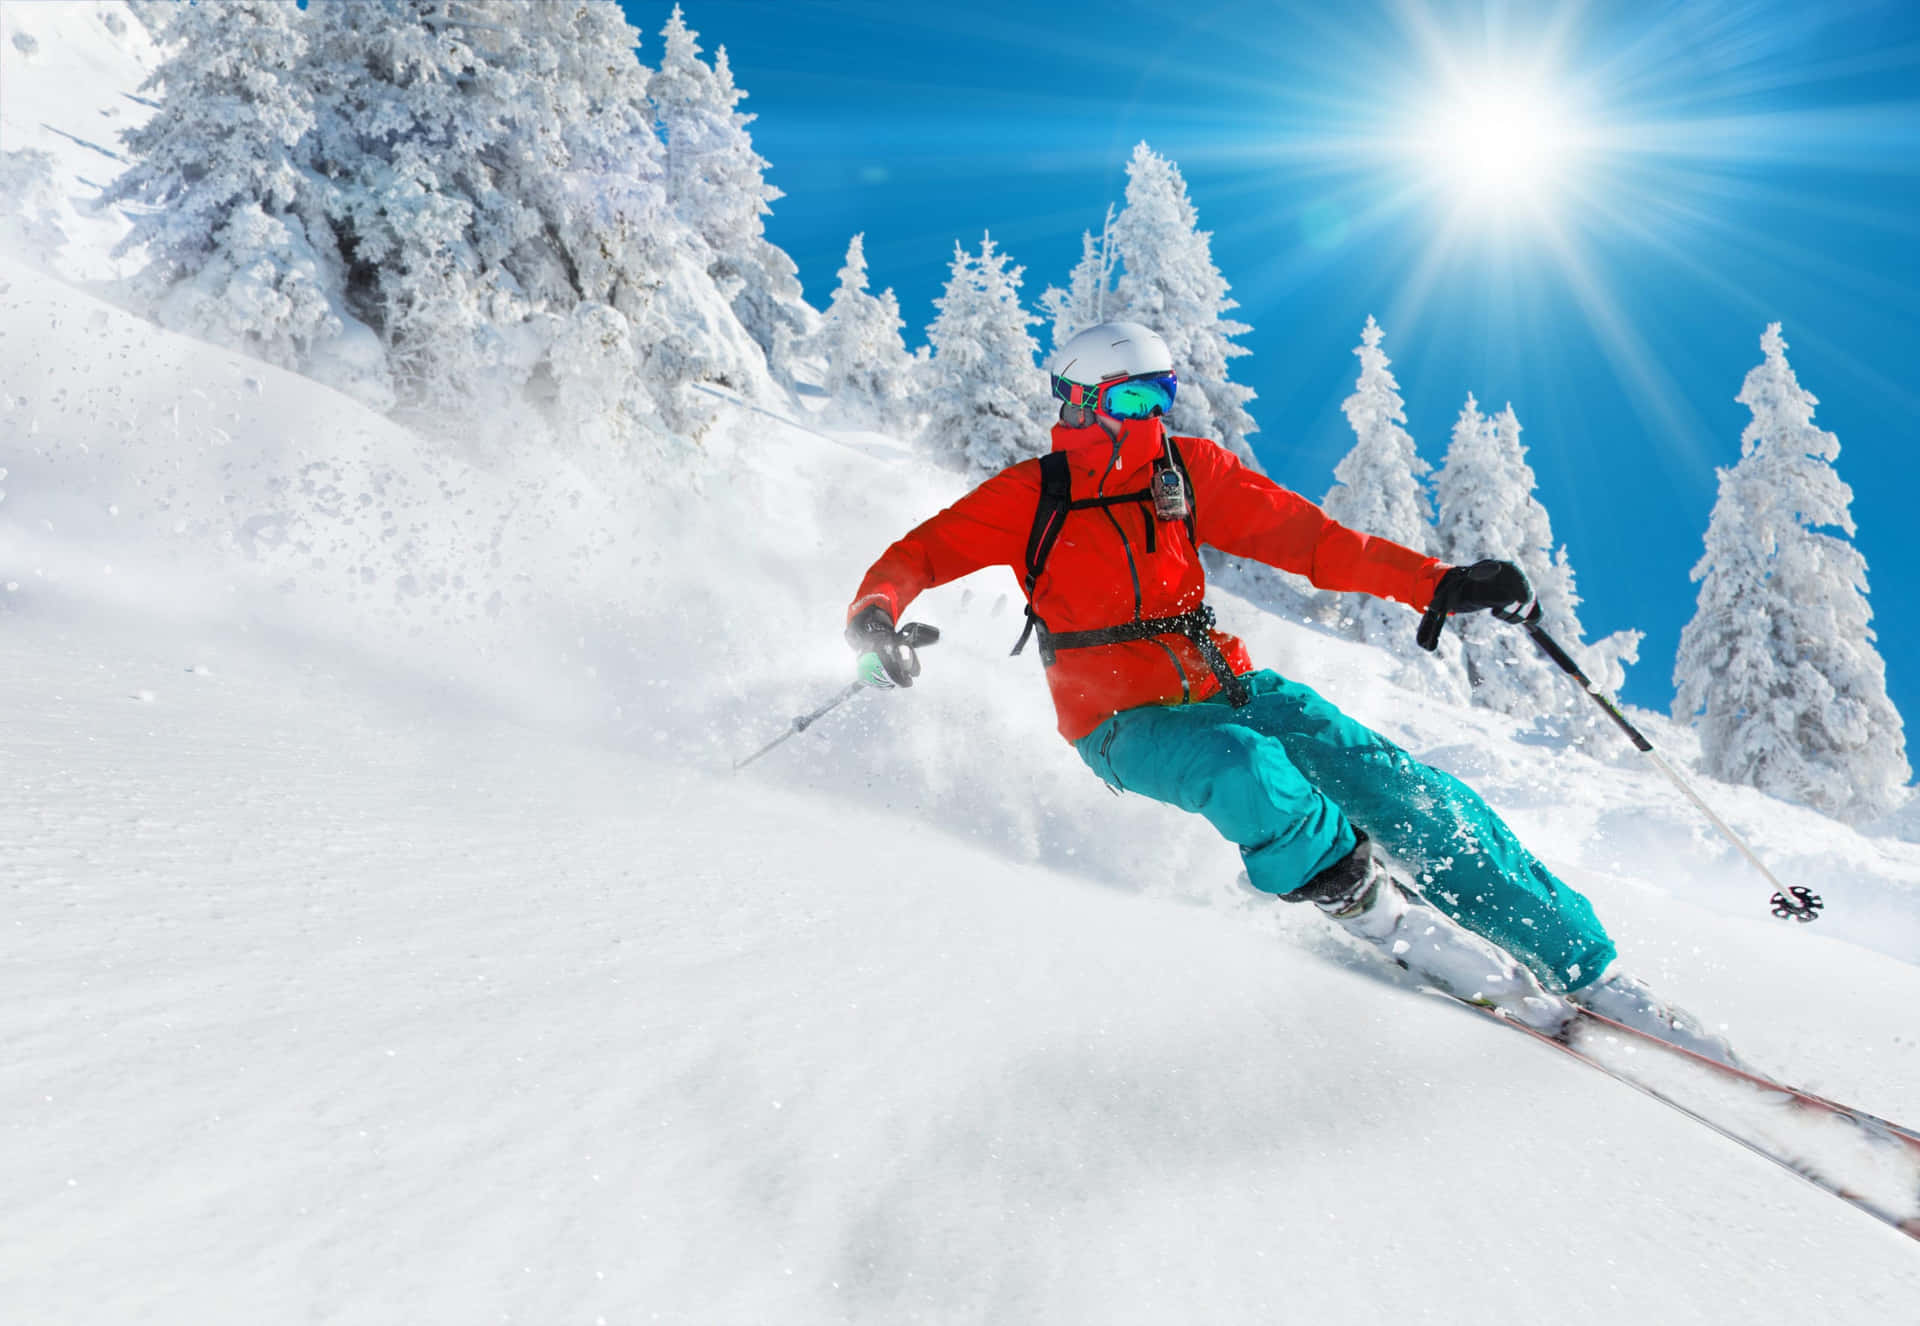 Ski down the snowy mountain and make the most of winter!